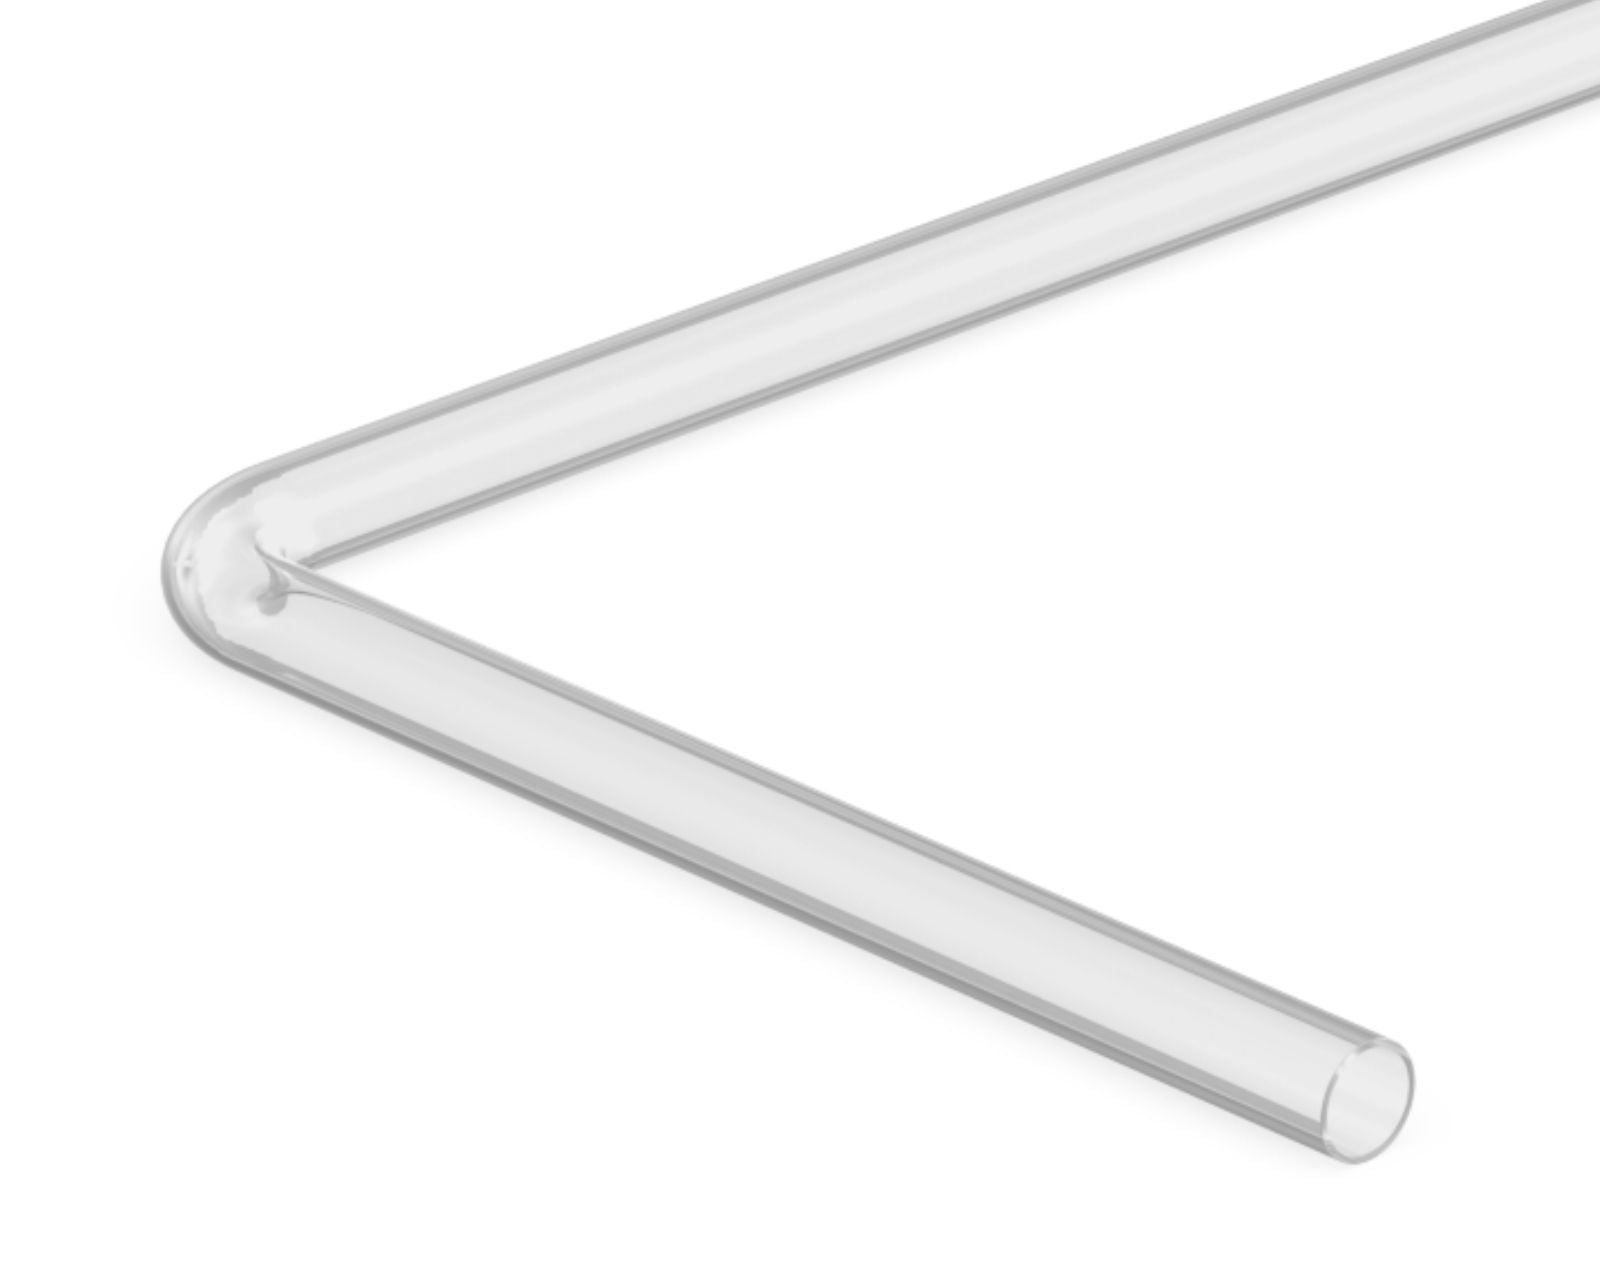 PrimoChill Frosted 90 Degree Pre-Bent 12mm ID x 16mm OD Rigid PMMA/Acrylic Tube - 200mmx500mm - 4 Pack - Frosted